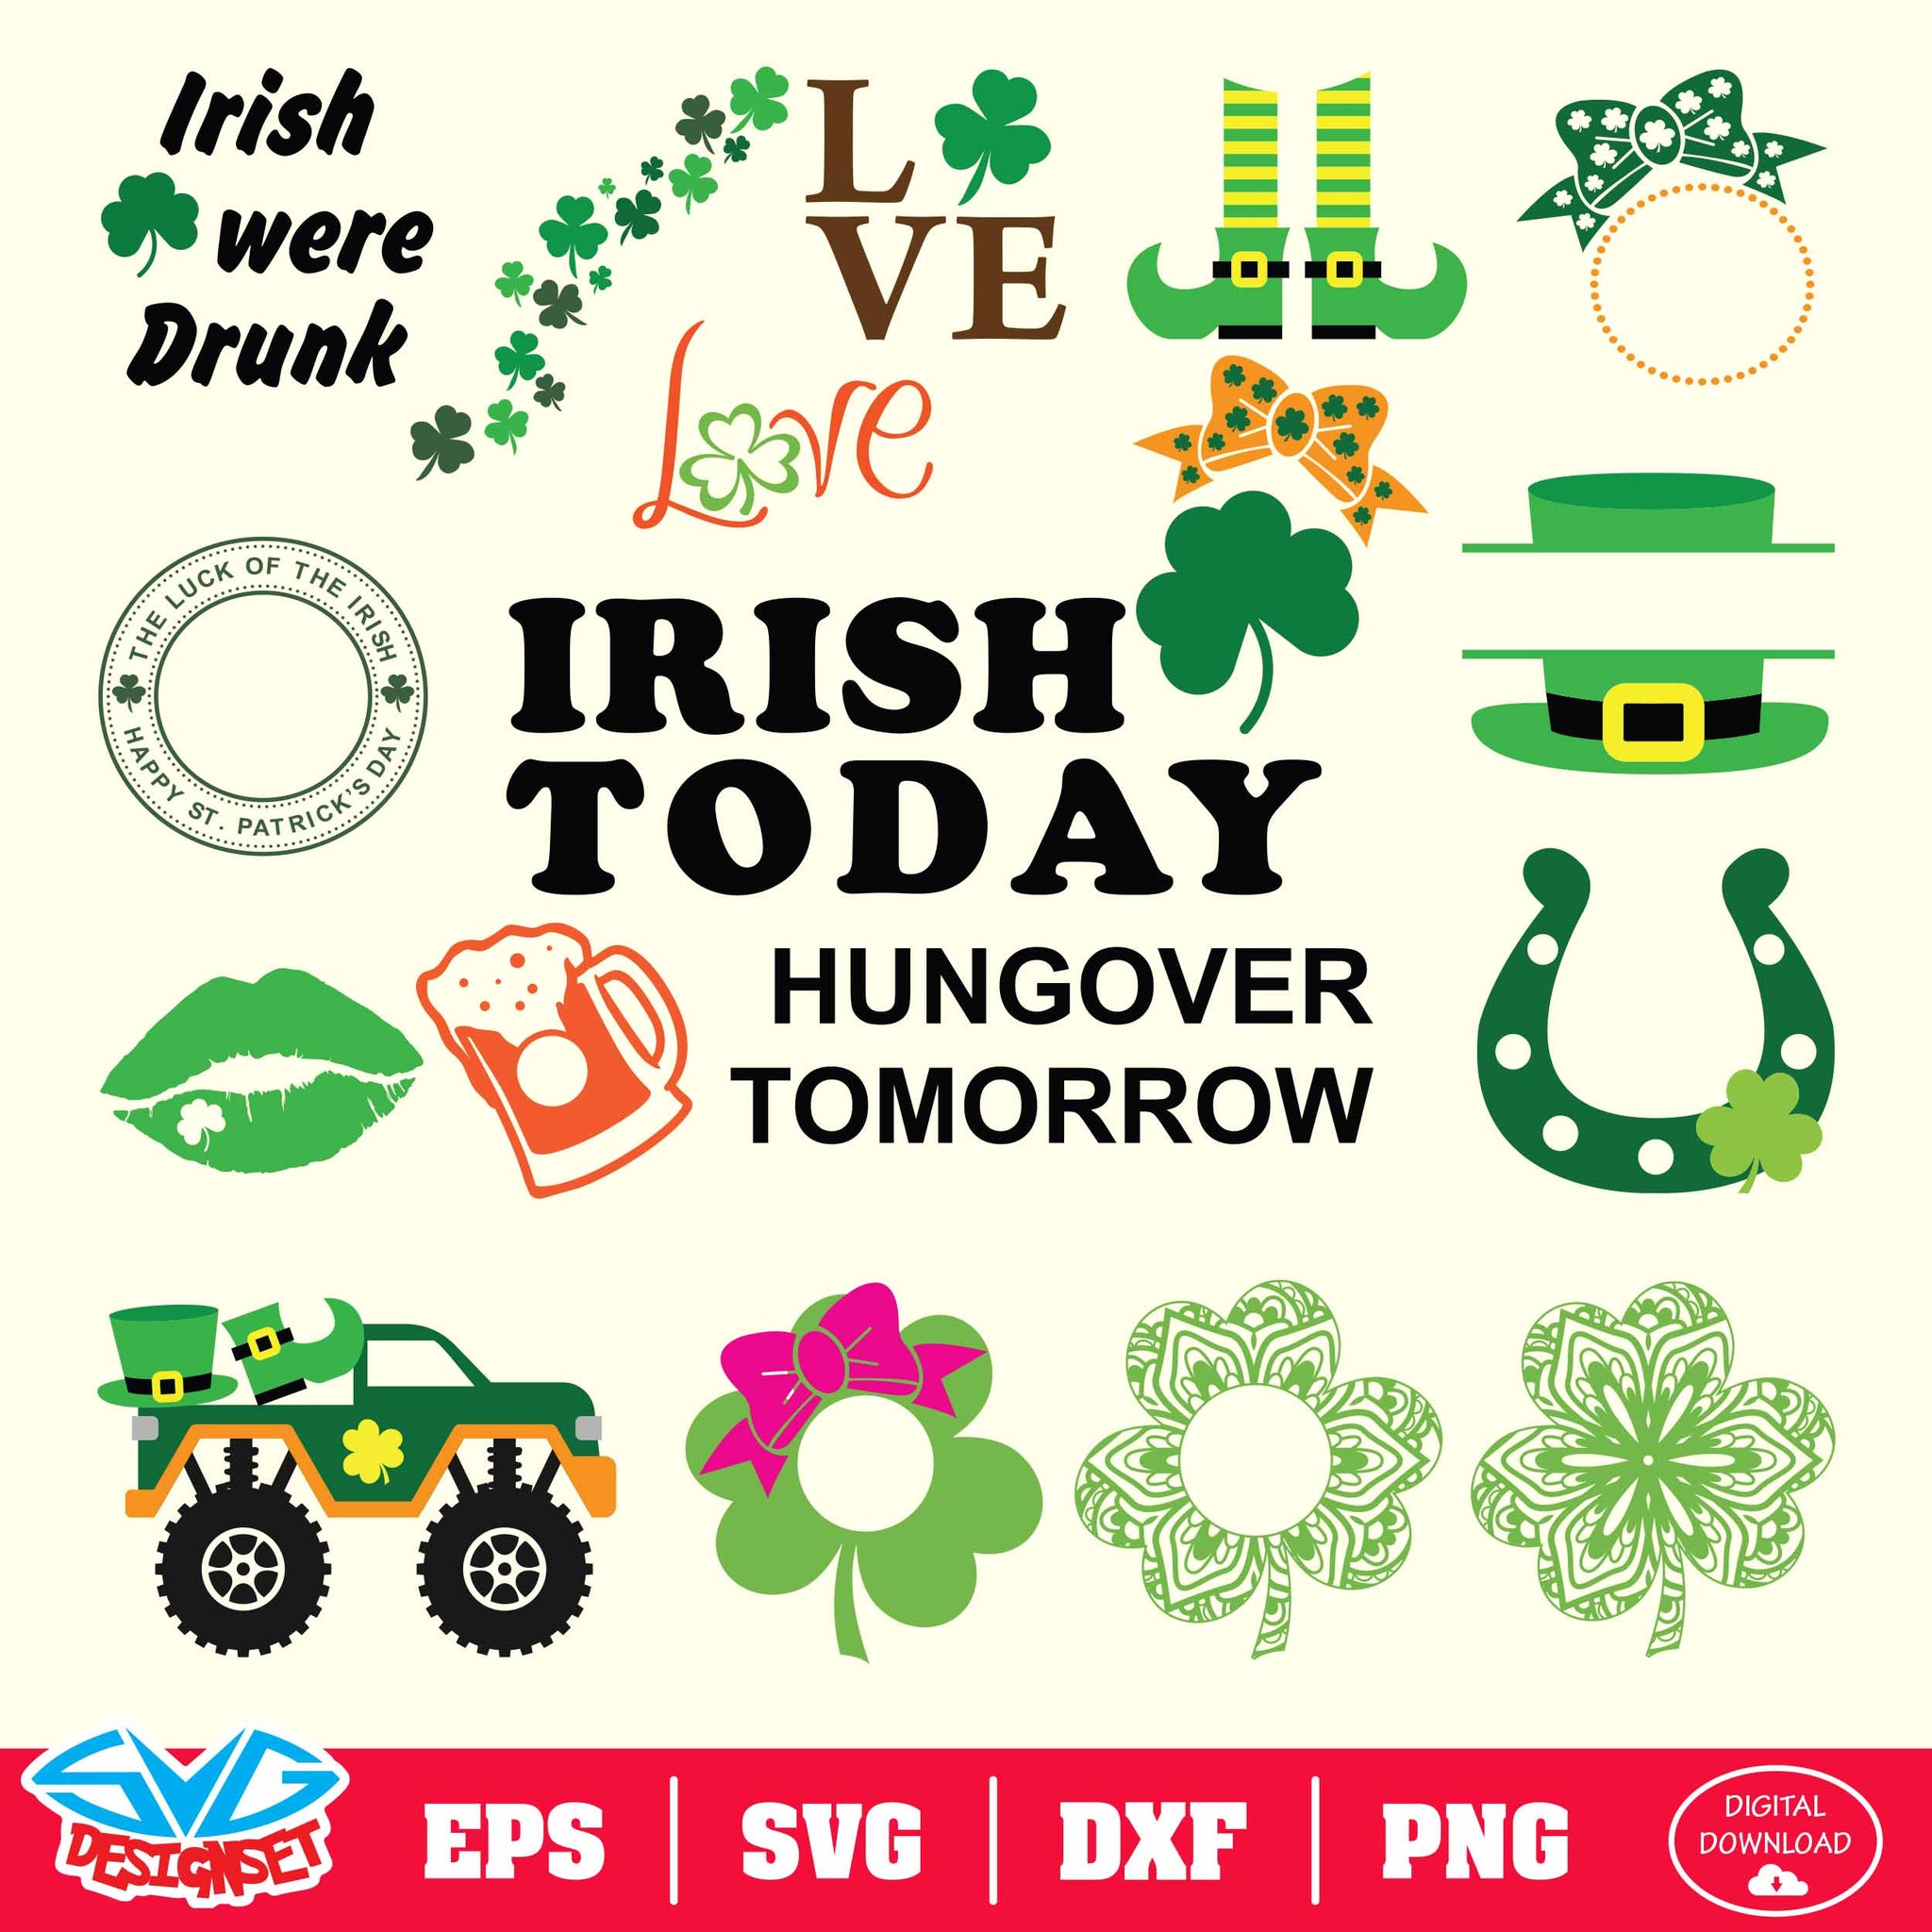 St. Patrick's Day Bundle Svg, Dxf, Eps, Png, Clipart, Silhouette and Cutfiles #002 - SVGDesignSets